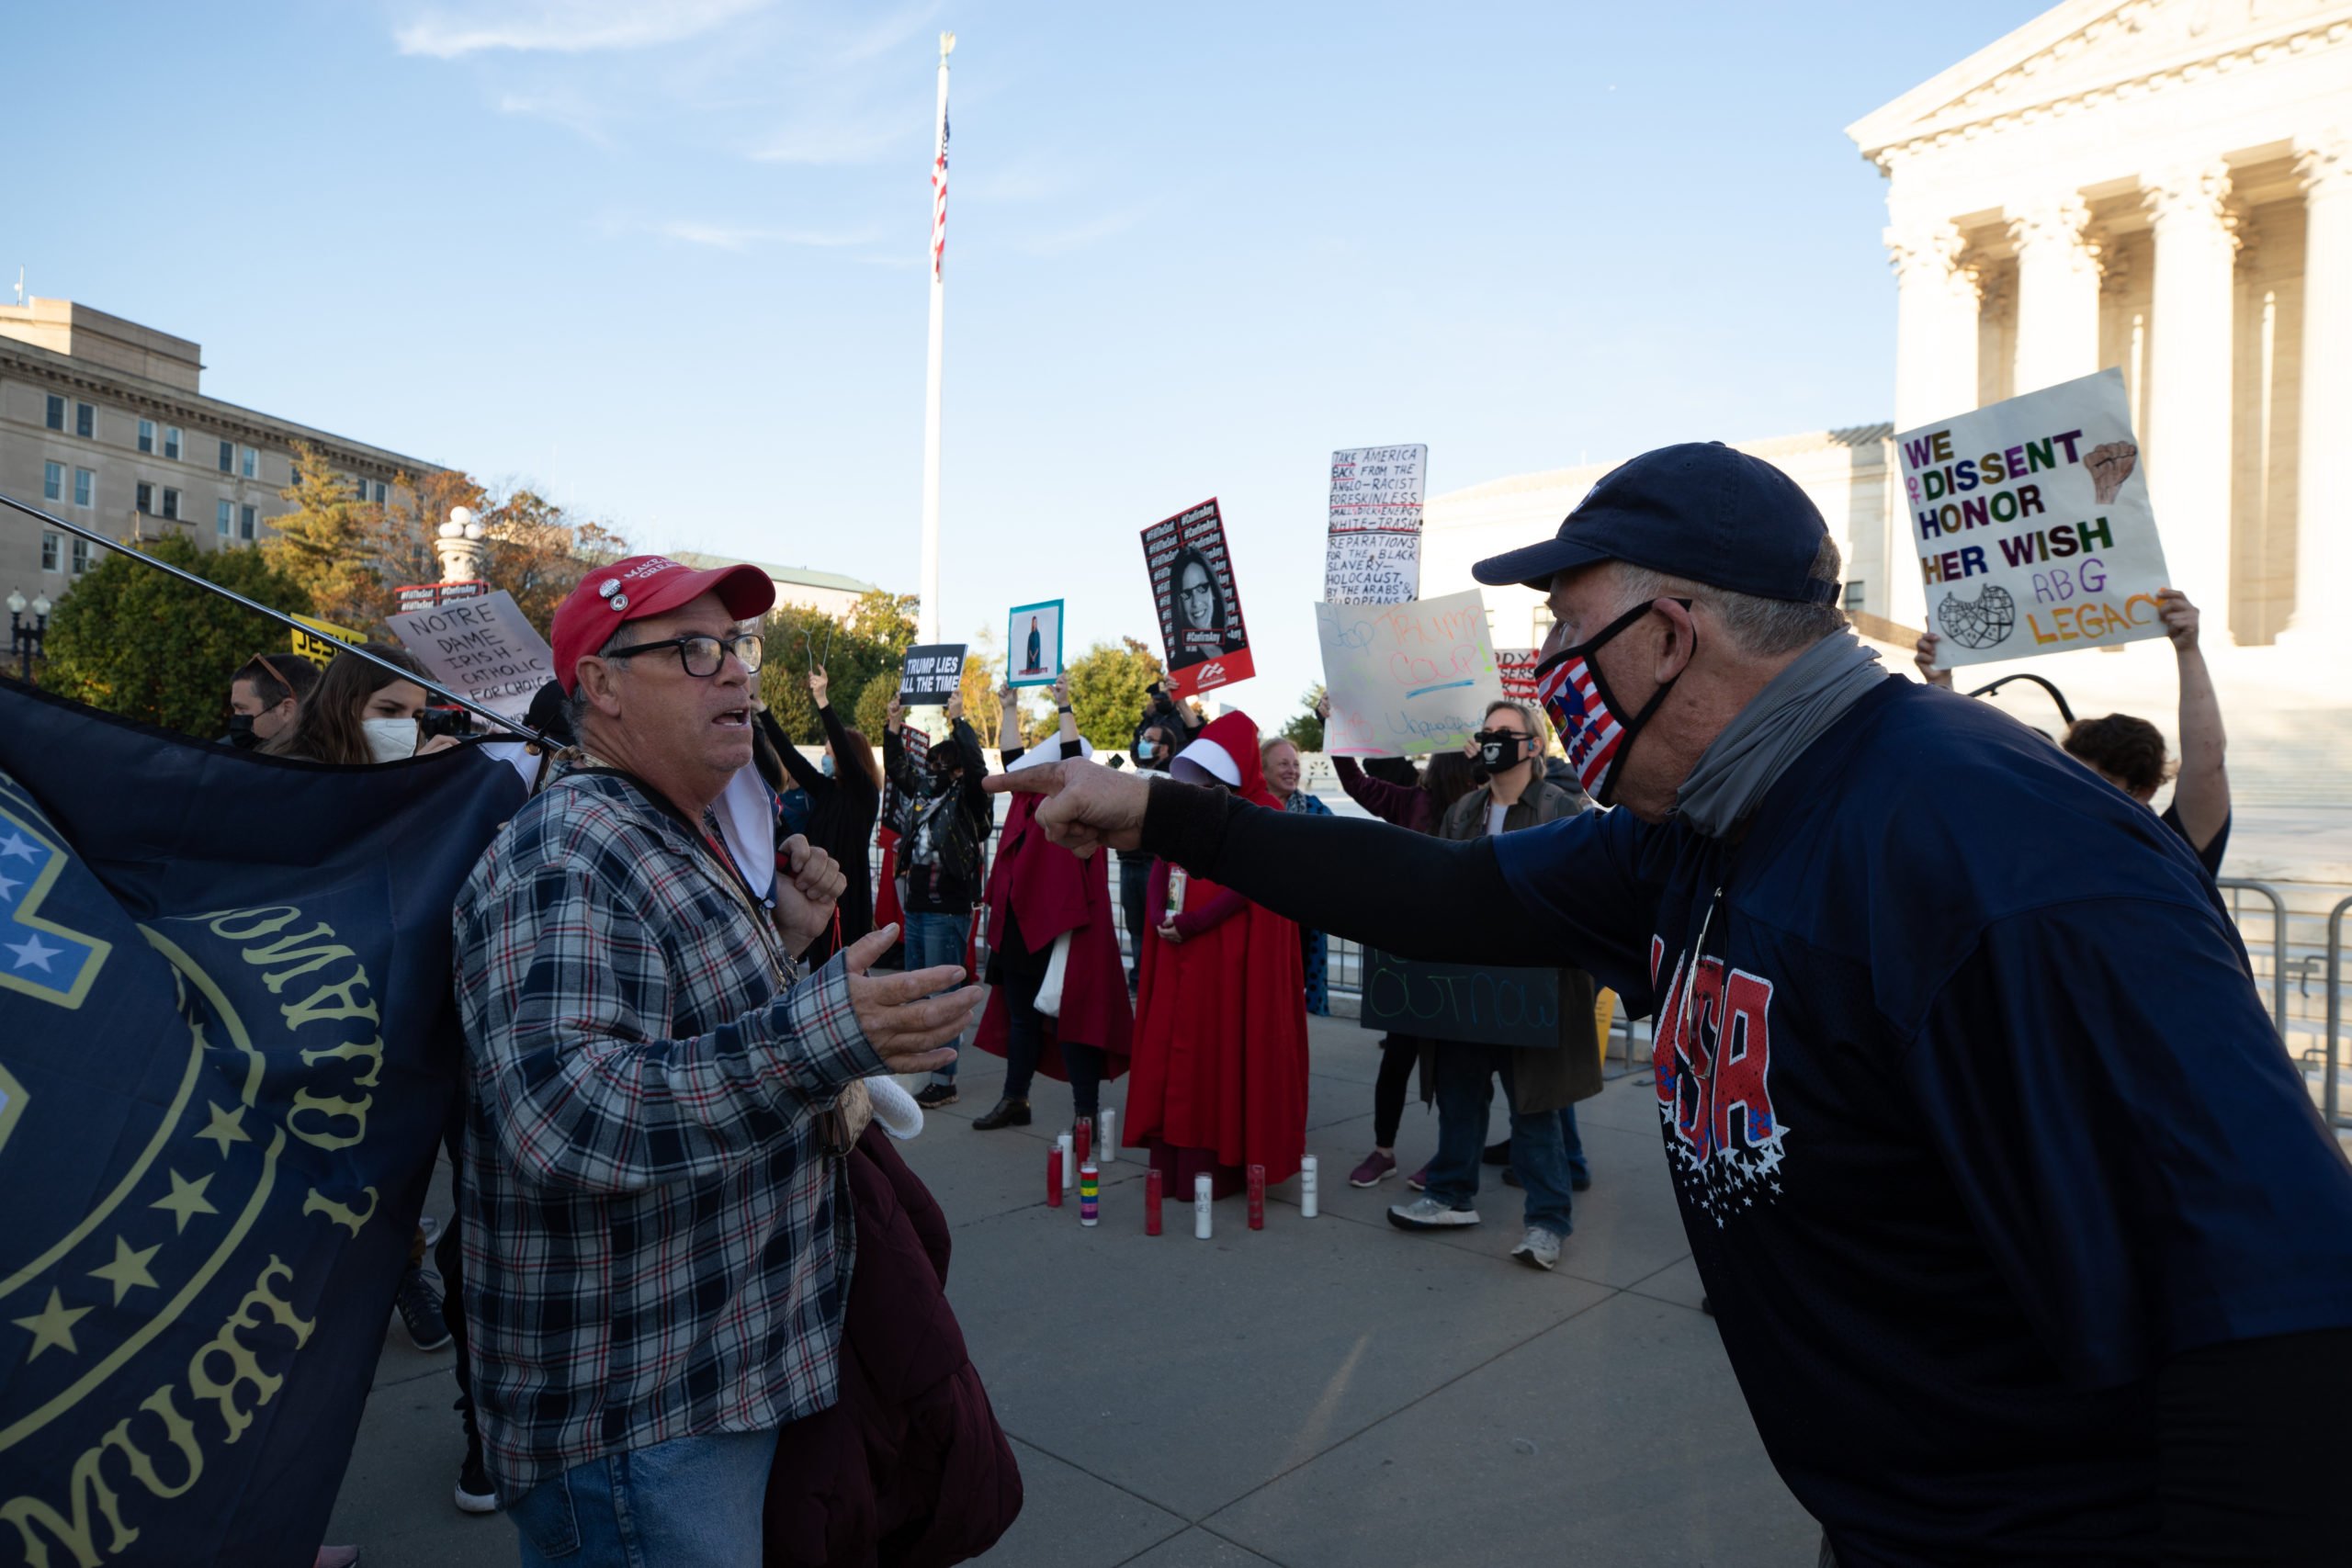 A Biden supporter yells at a Trump supporter for questioning him before he walks off and gives a Nazi salute in Washington, D.C. on October 26, 2020. (Kaylee Greenlee - Daily Caller News Foundation)